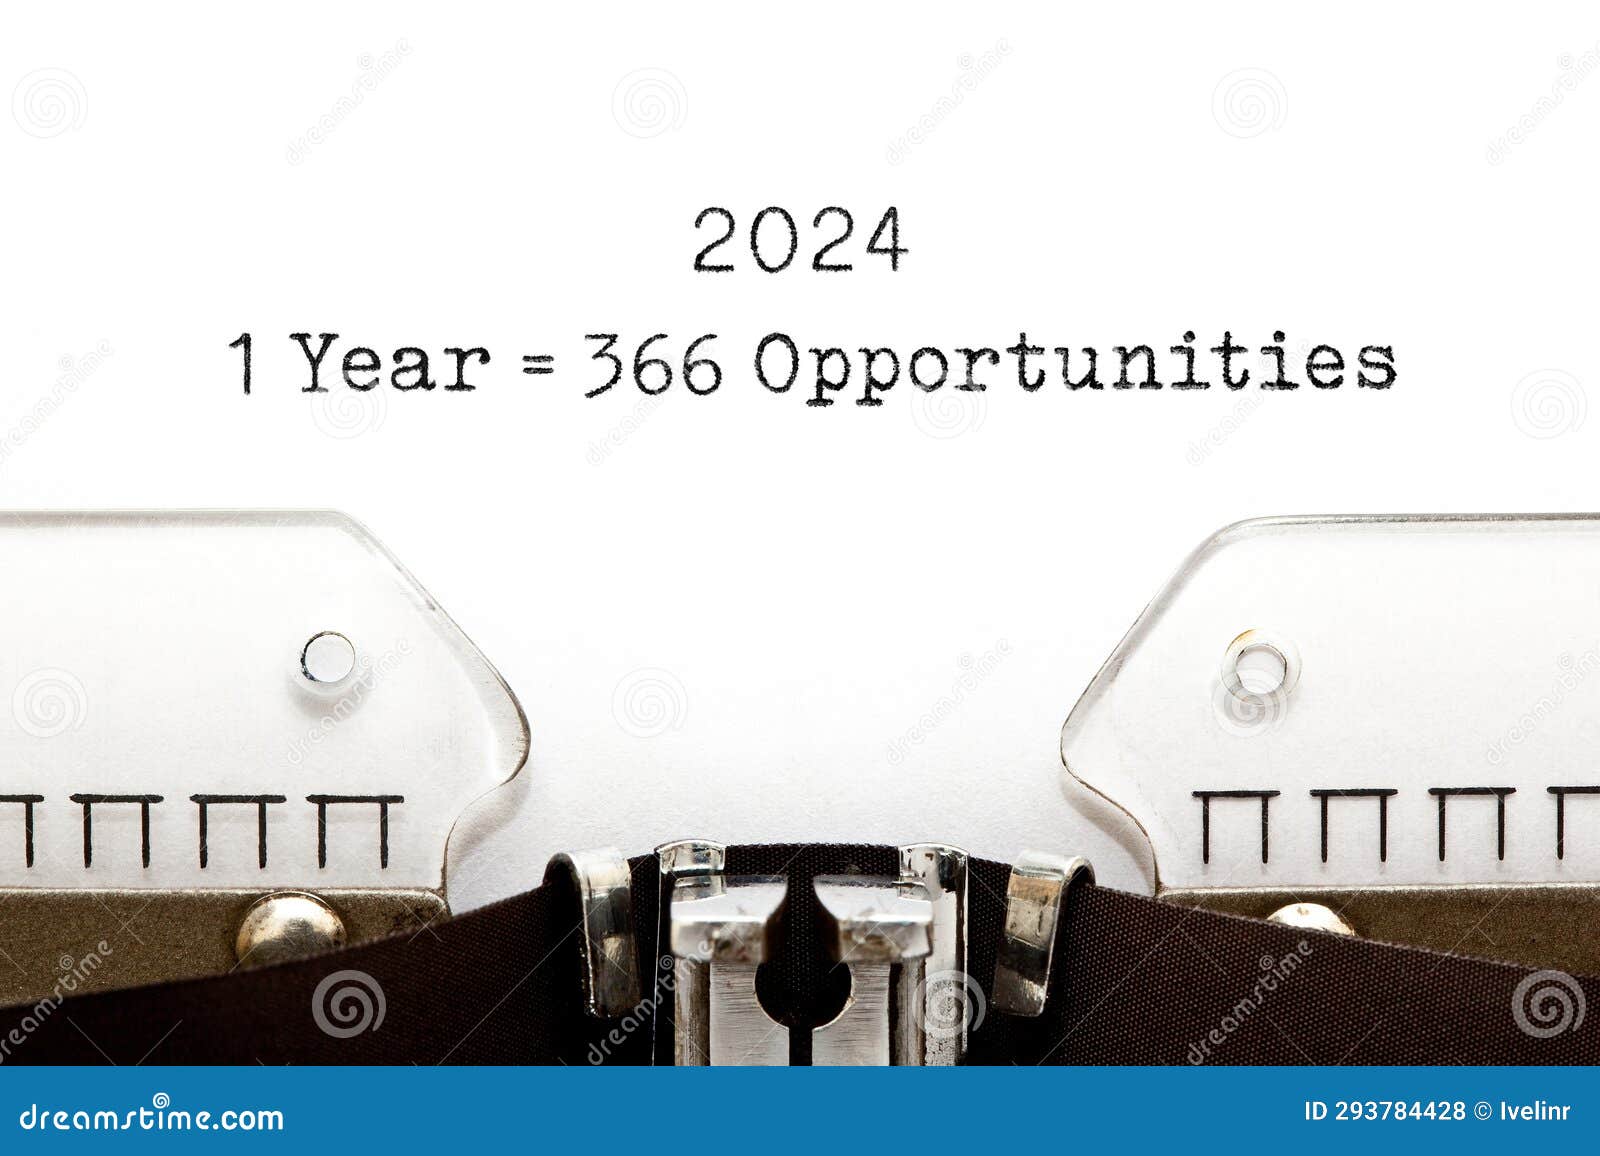 1 leap year 2024 equal to 366 opportunities